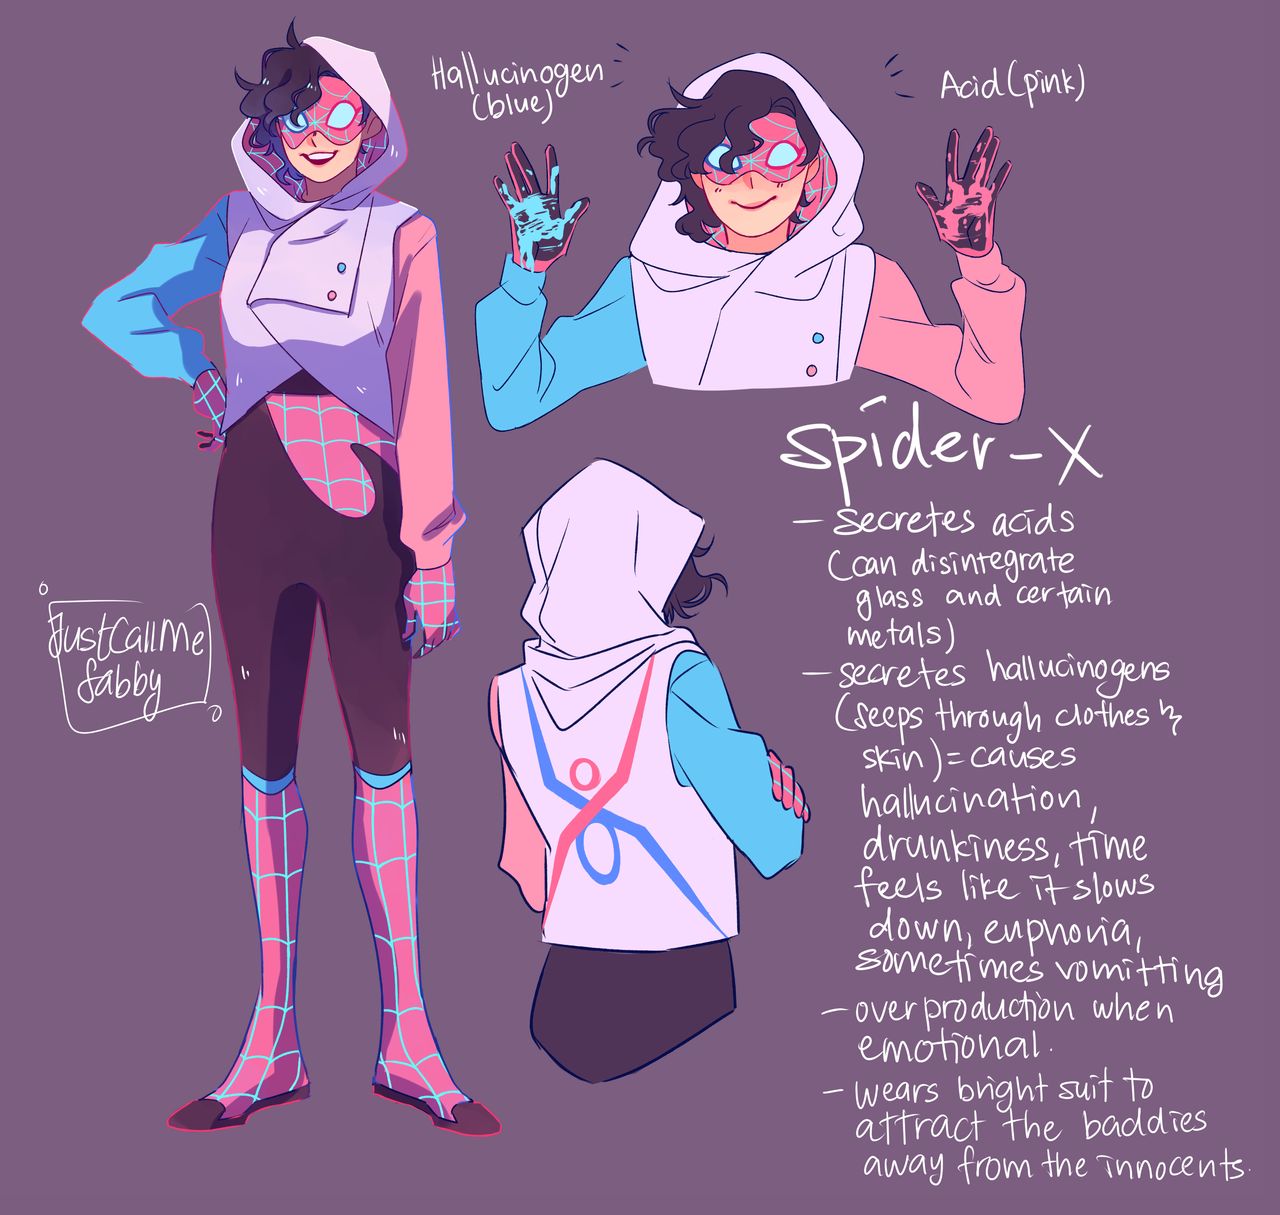 cohost! - AH finally can get this #spidersona out of my system